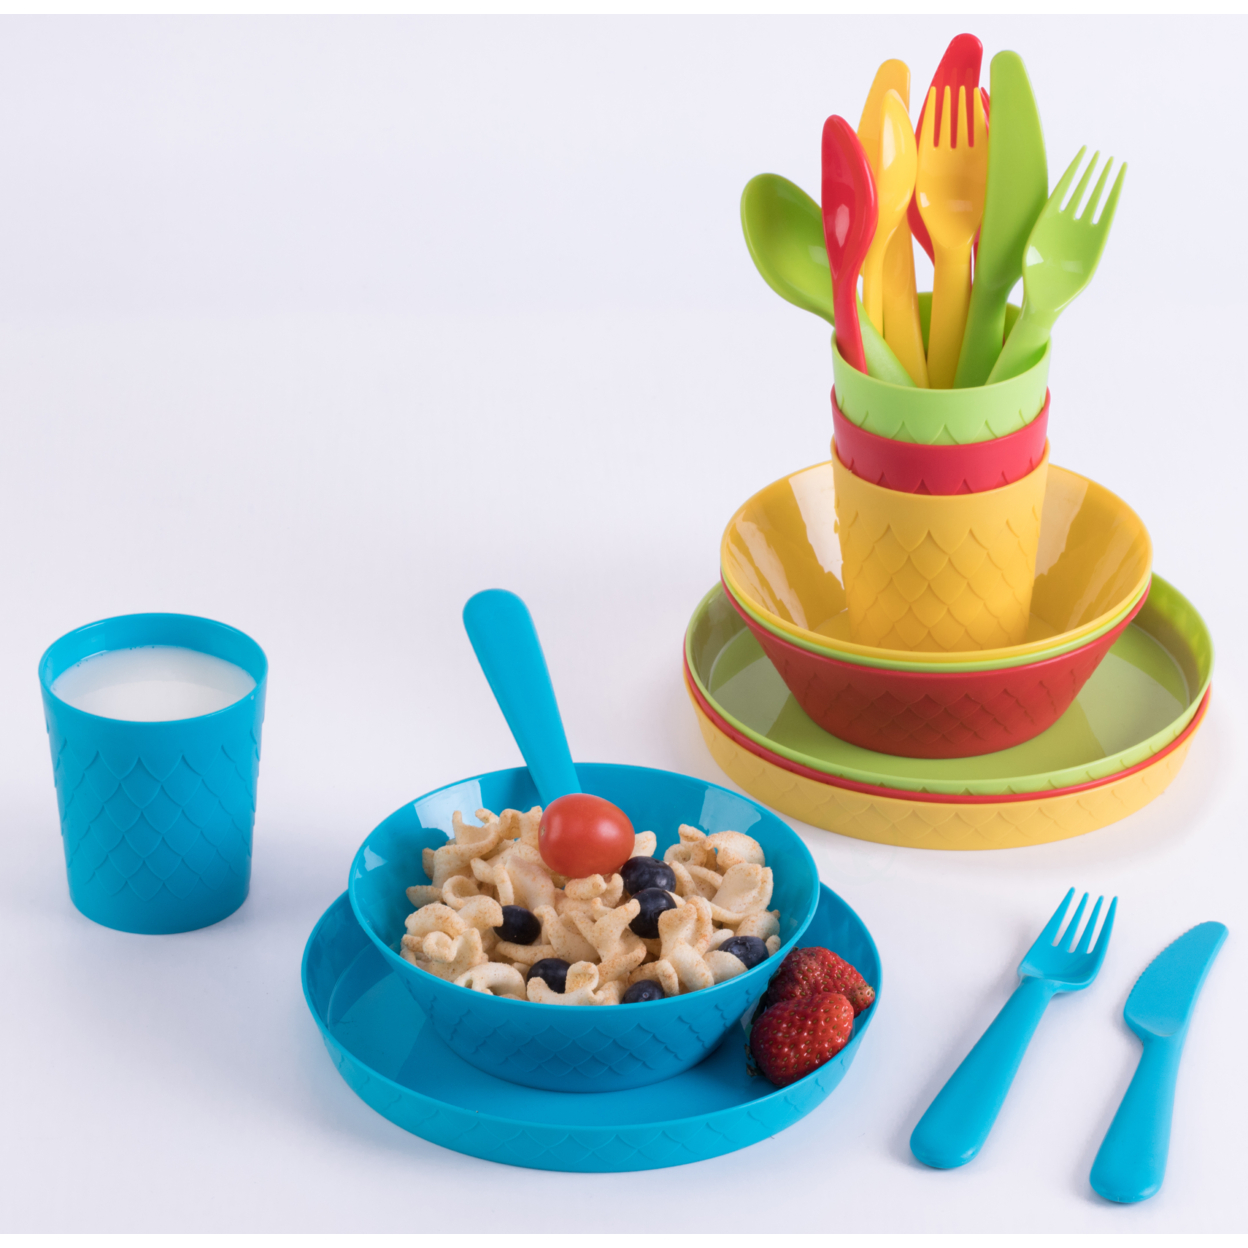 24-Piece Kids Dinnerware Set Plastic 4 Plates, 4 Bowls, 4 Cups, 4 Forks, 4 Knives, And 4 Spoons